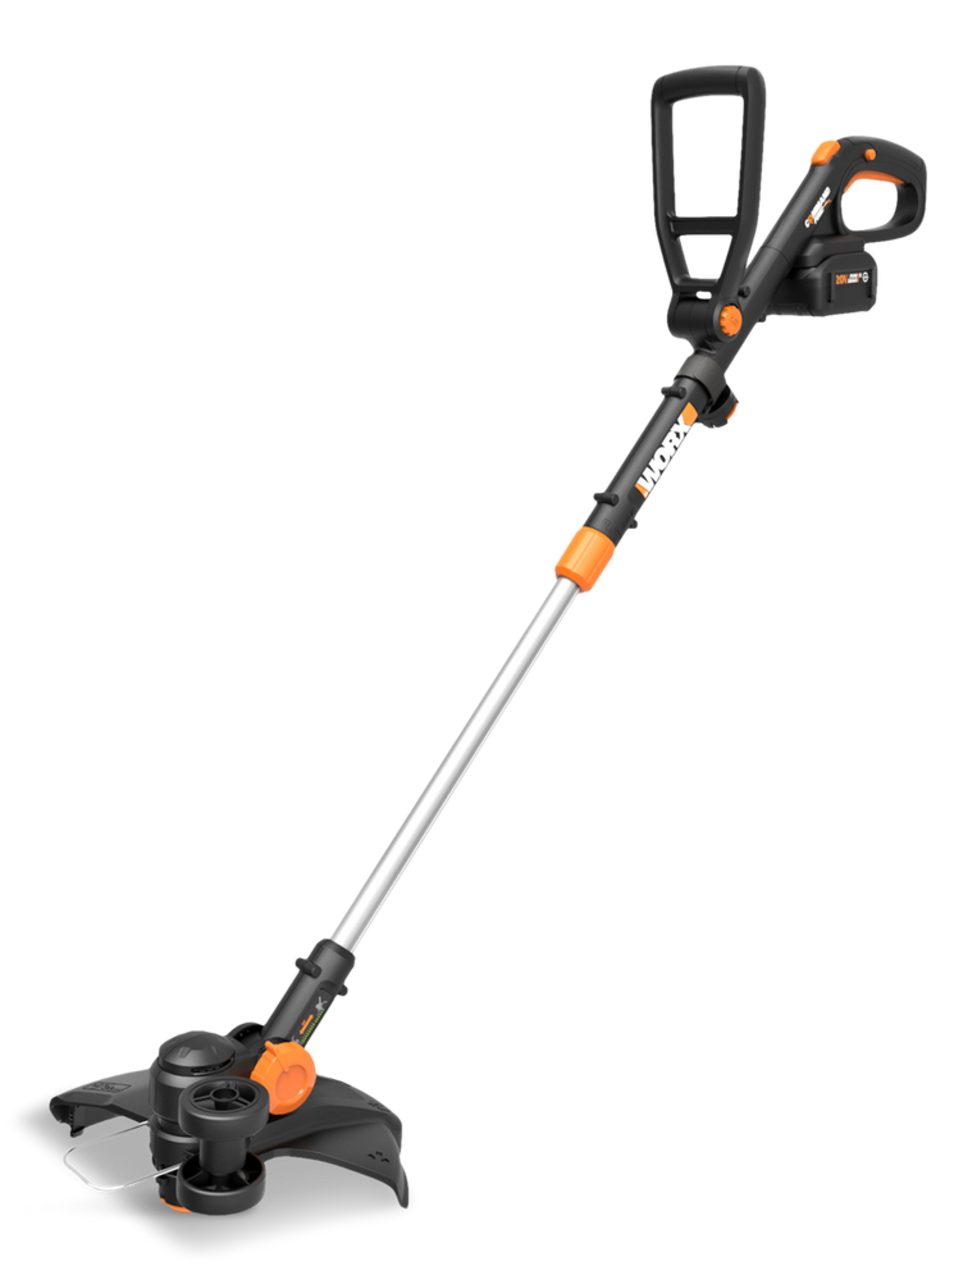 https://media-www.canadiantire.ca/product/seasonal-gardening/outdoor-tools/hand-held-outdoor-power-tools/0601798/worx-20v-grass-trimmer-with-4ah-battery-6bc5fcf9-299e-45df-864d-95e51c709c22.png?imdensity=1&imwidth=1244&impolicy=mZoom